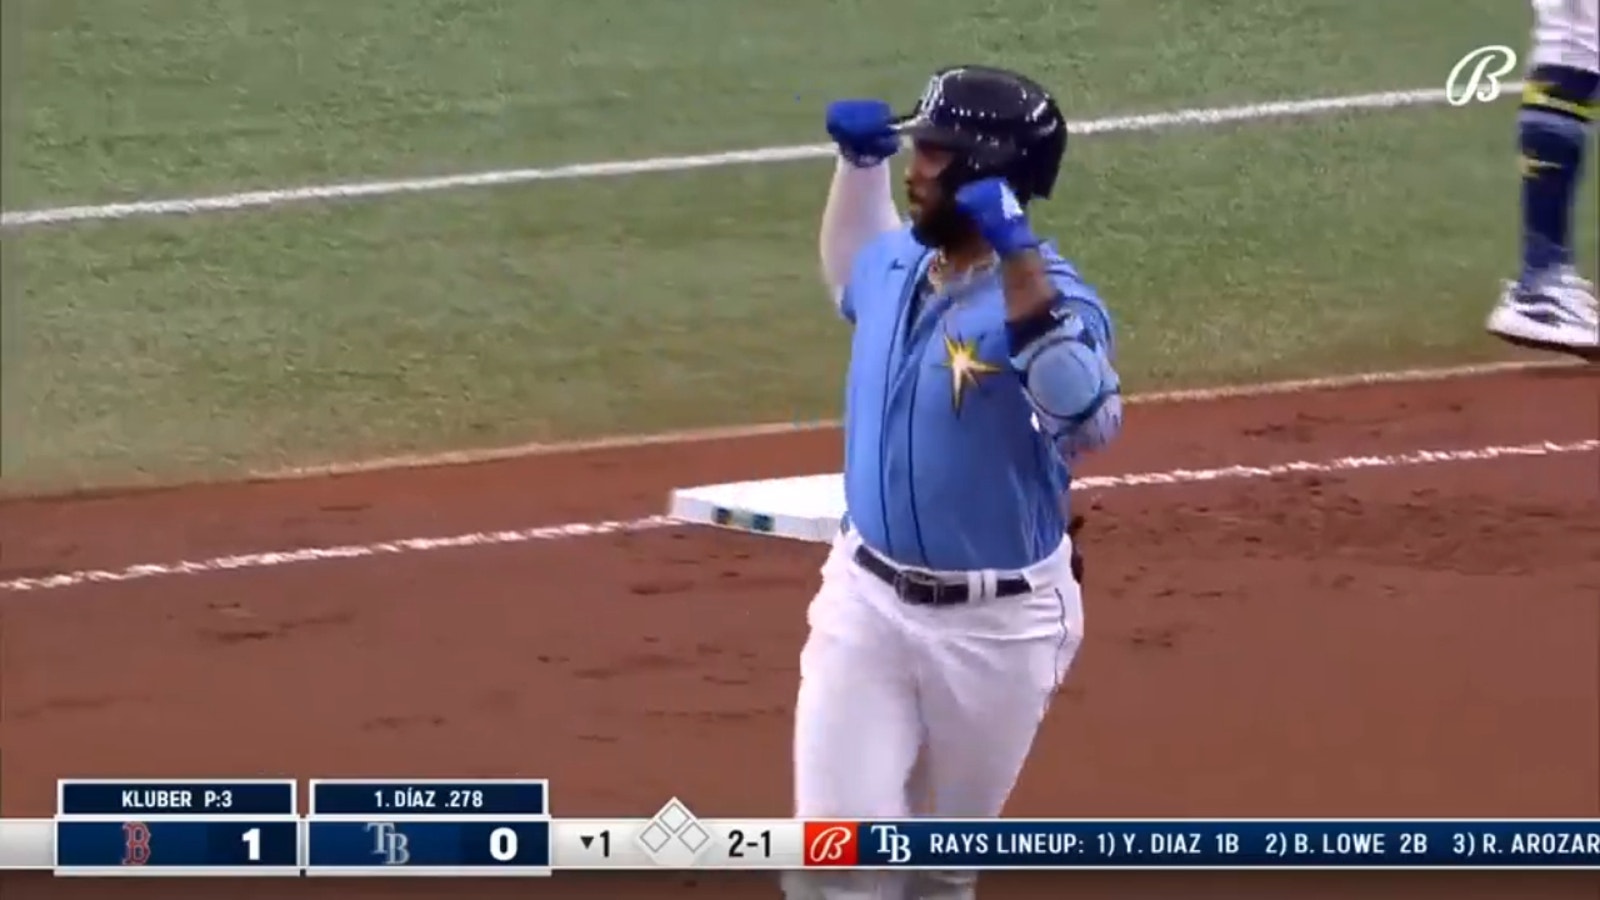 Yandy Díaz crushes a home run as the Rays are tied at 1-1 with the Red Sox